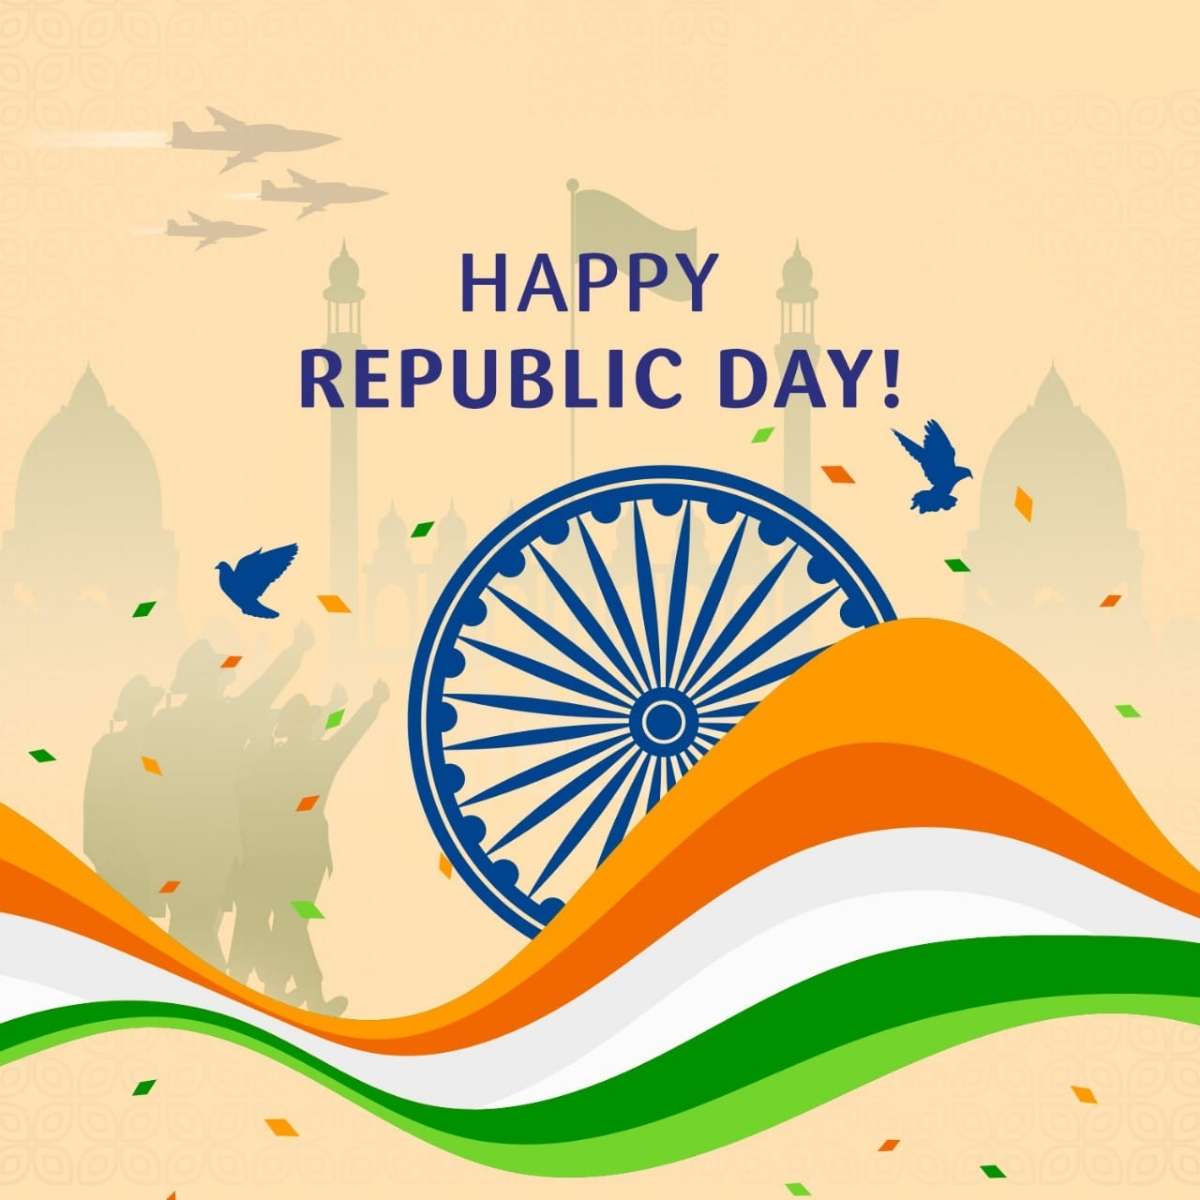 Hd Wallpapers Republic Day Download